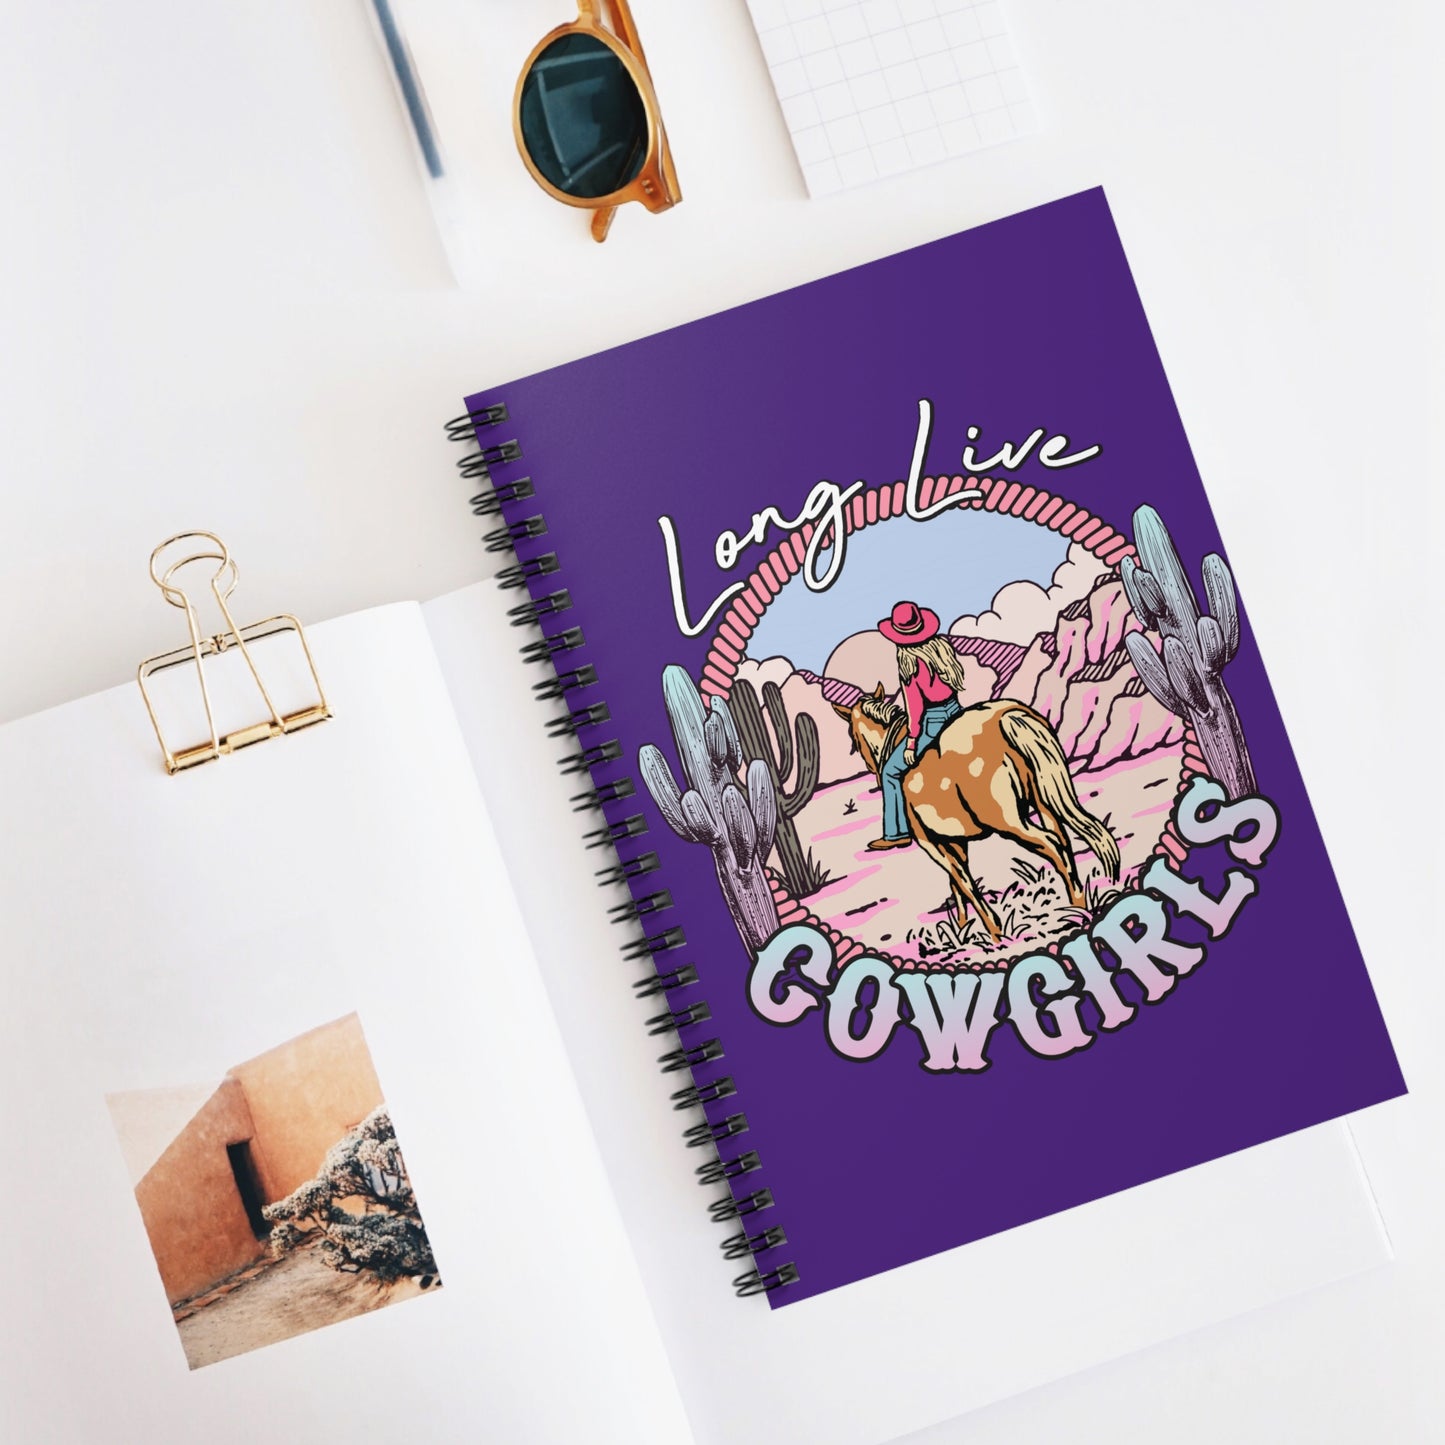 Long Live Cowgirls: Spiral Notebook - Log Books - Journals - Diaries - and More Custom Printed by TheGlassyLass